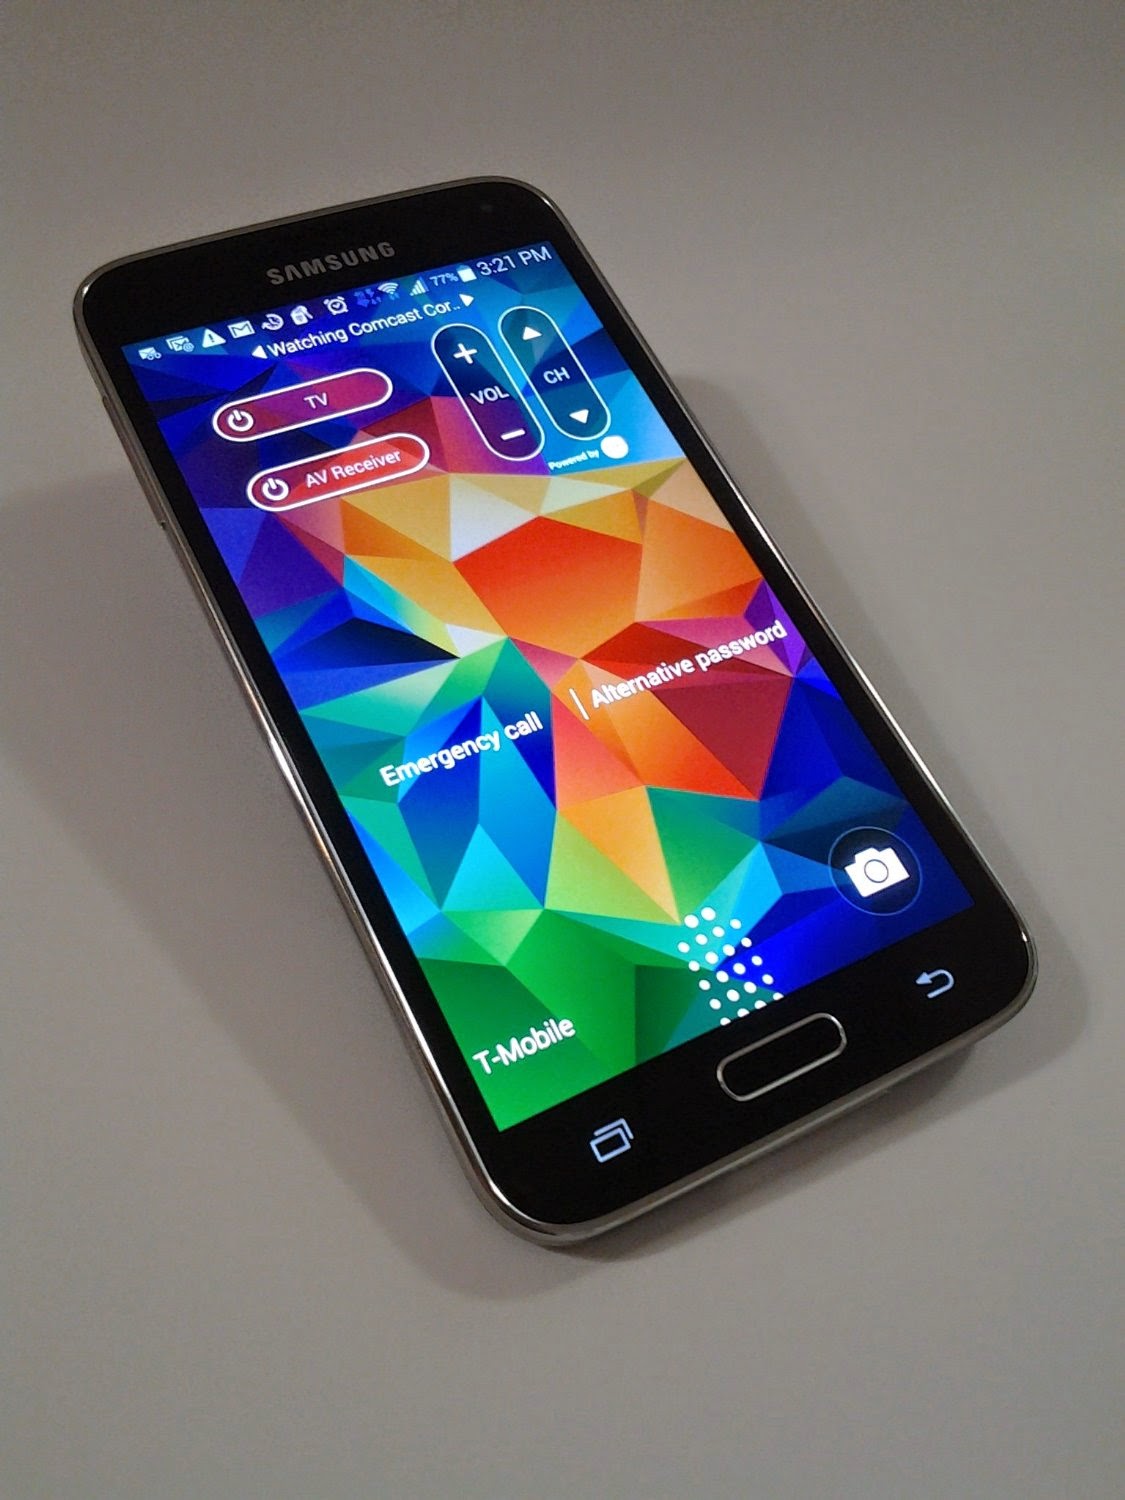 Galaxy s5 4g Lte images